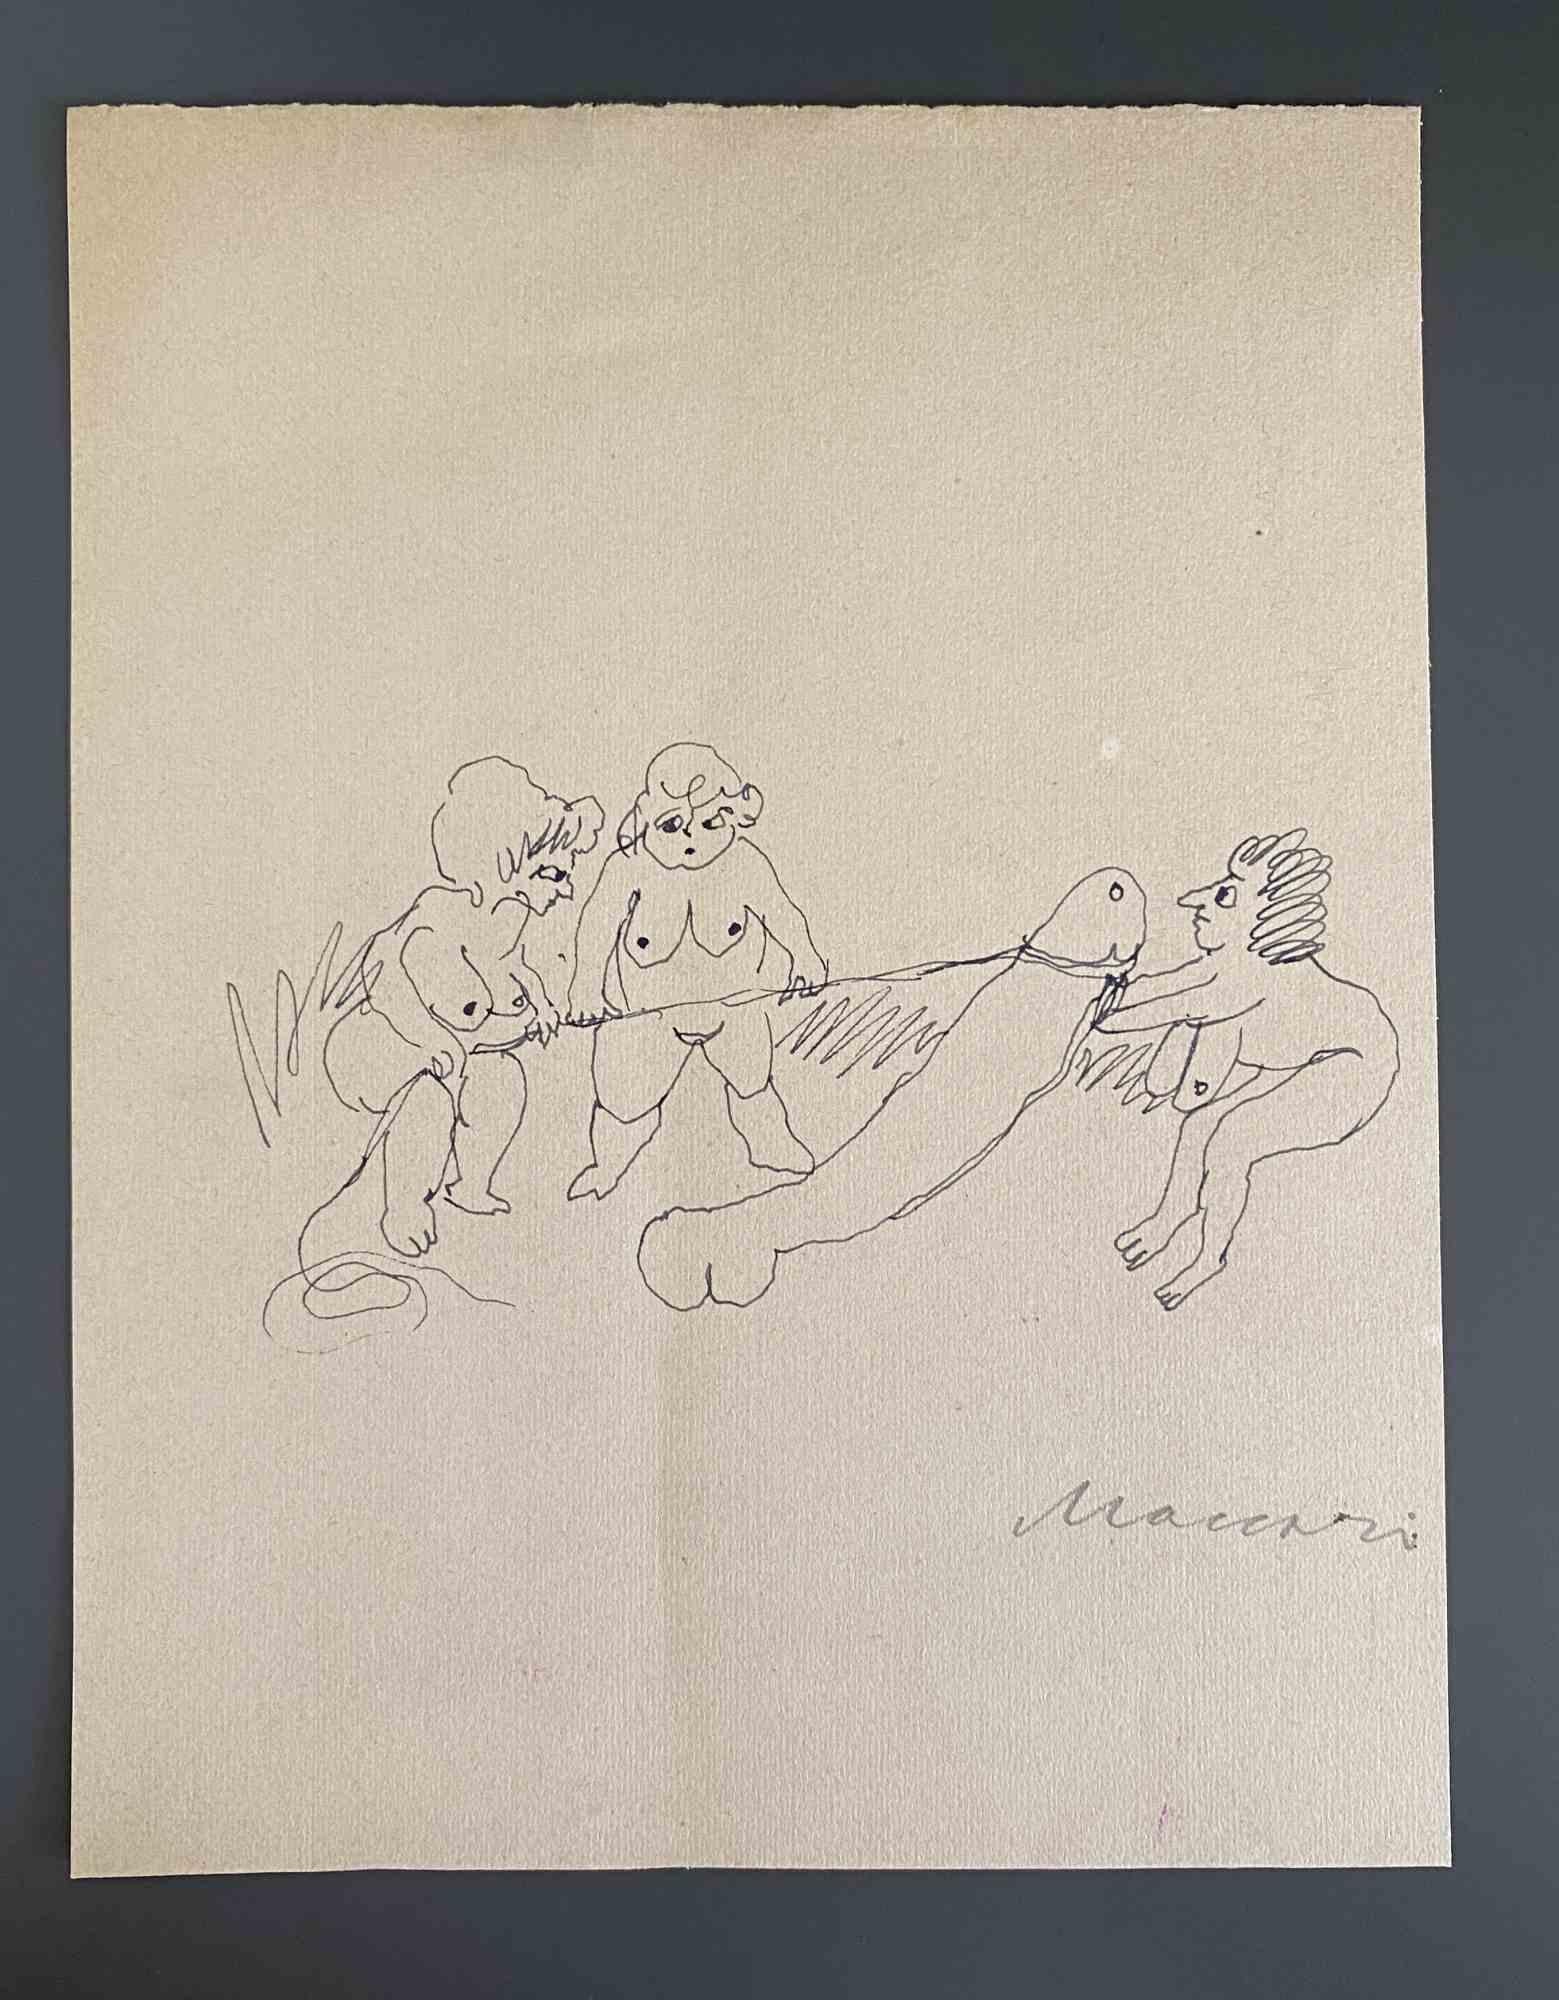 Push and Pull is a pen Drawing realized by Mino Maccari  (1924-1989) in the Mid-20th Century.

Hand-signed on the lower.

Good conditions.

Mino Maccari (Siena, 1924-Rome, June 16, 1989) was an Italian writer, painter, engraver and journalist,